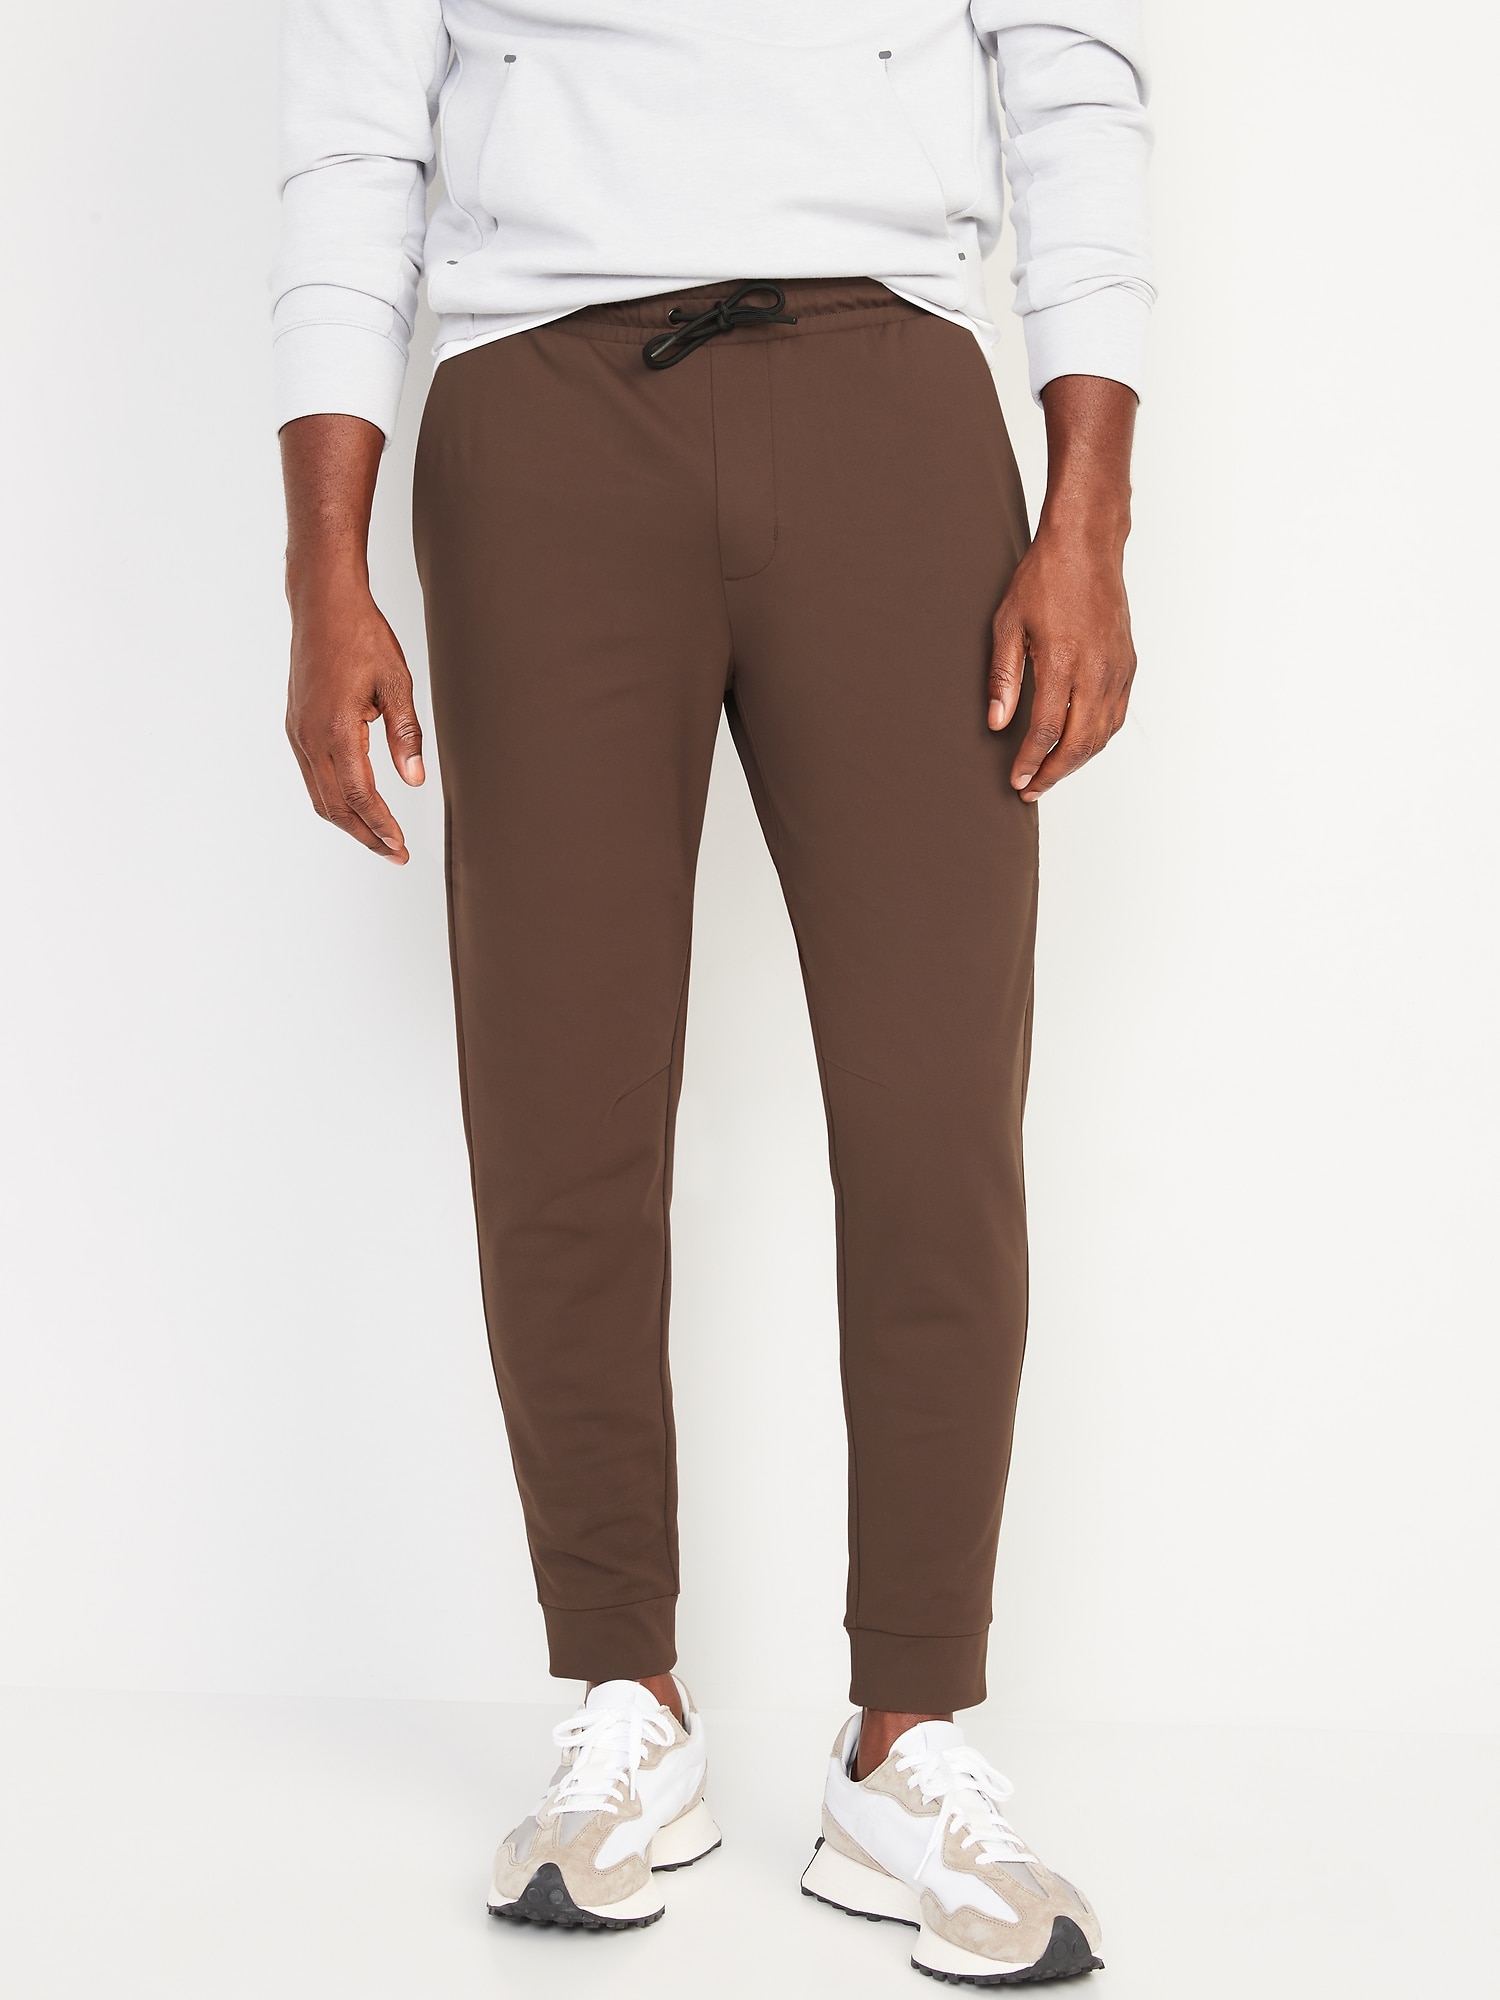 Old Navy PowerSoft Coze Edition Jogger Pants brown. 1